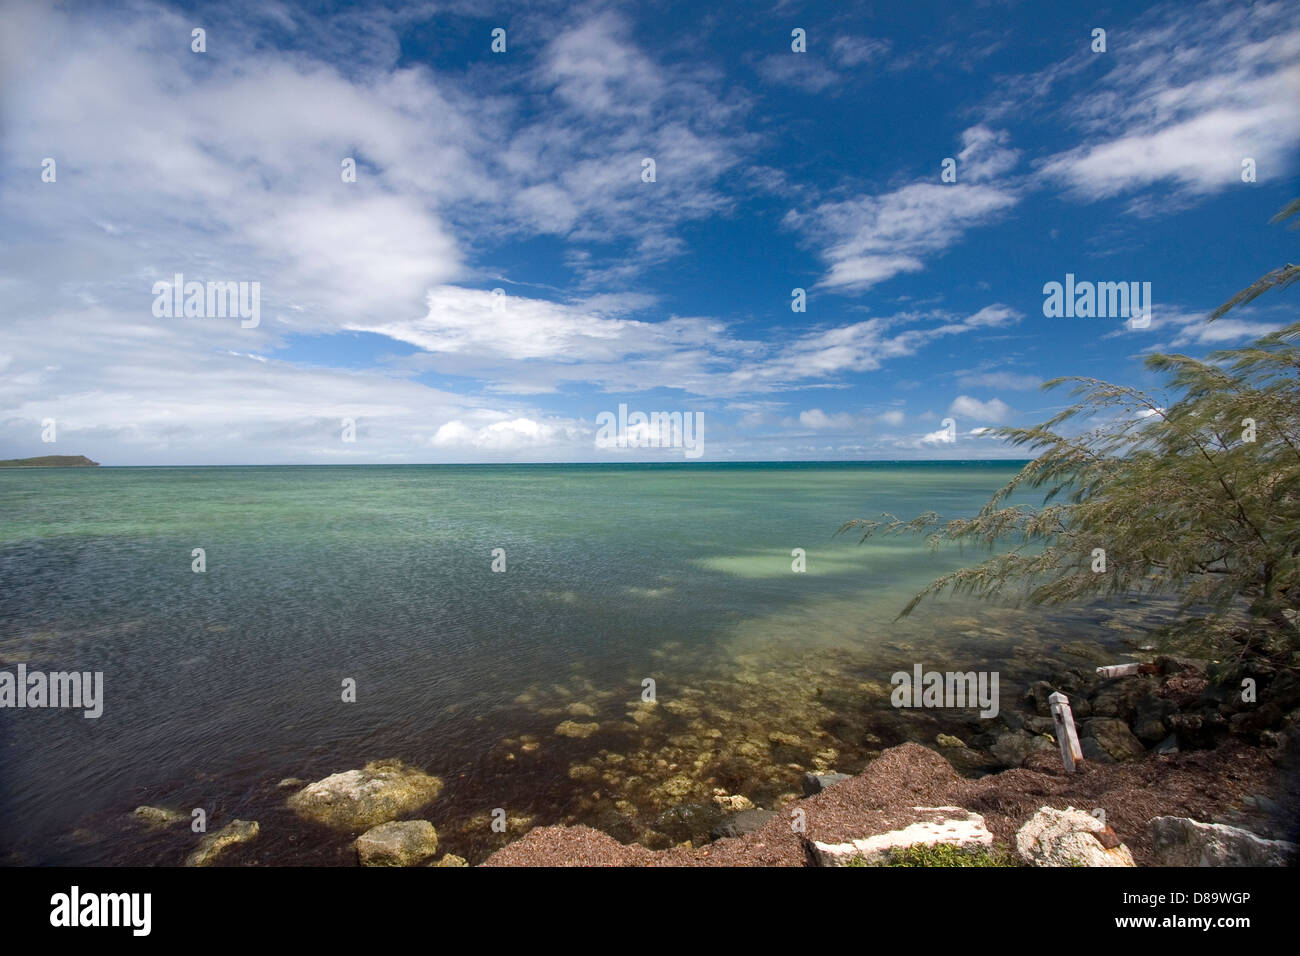 Looking out to the South Pacific Ocean from Noumea, New Caledonia, French Polynesia. Stock Photo